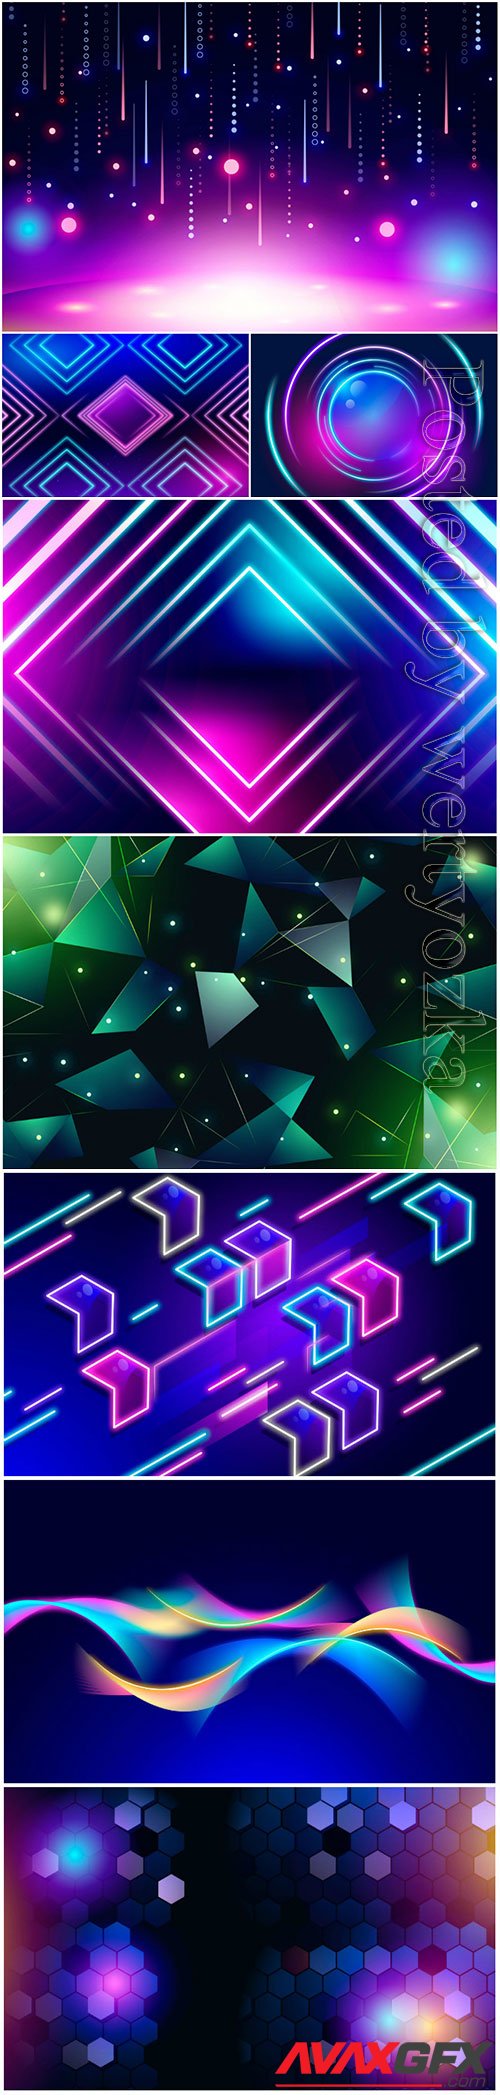 Neon abstract background vector set